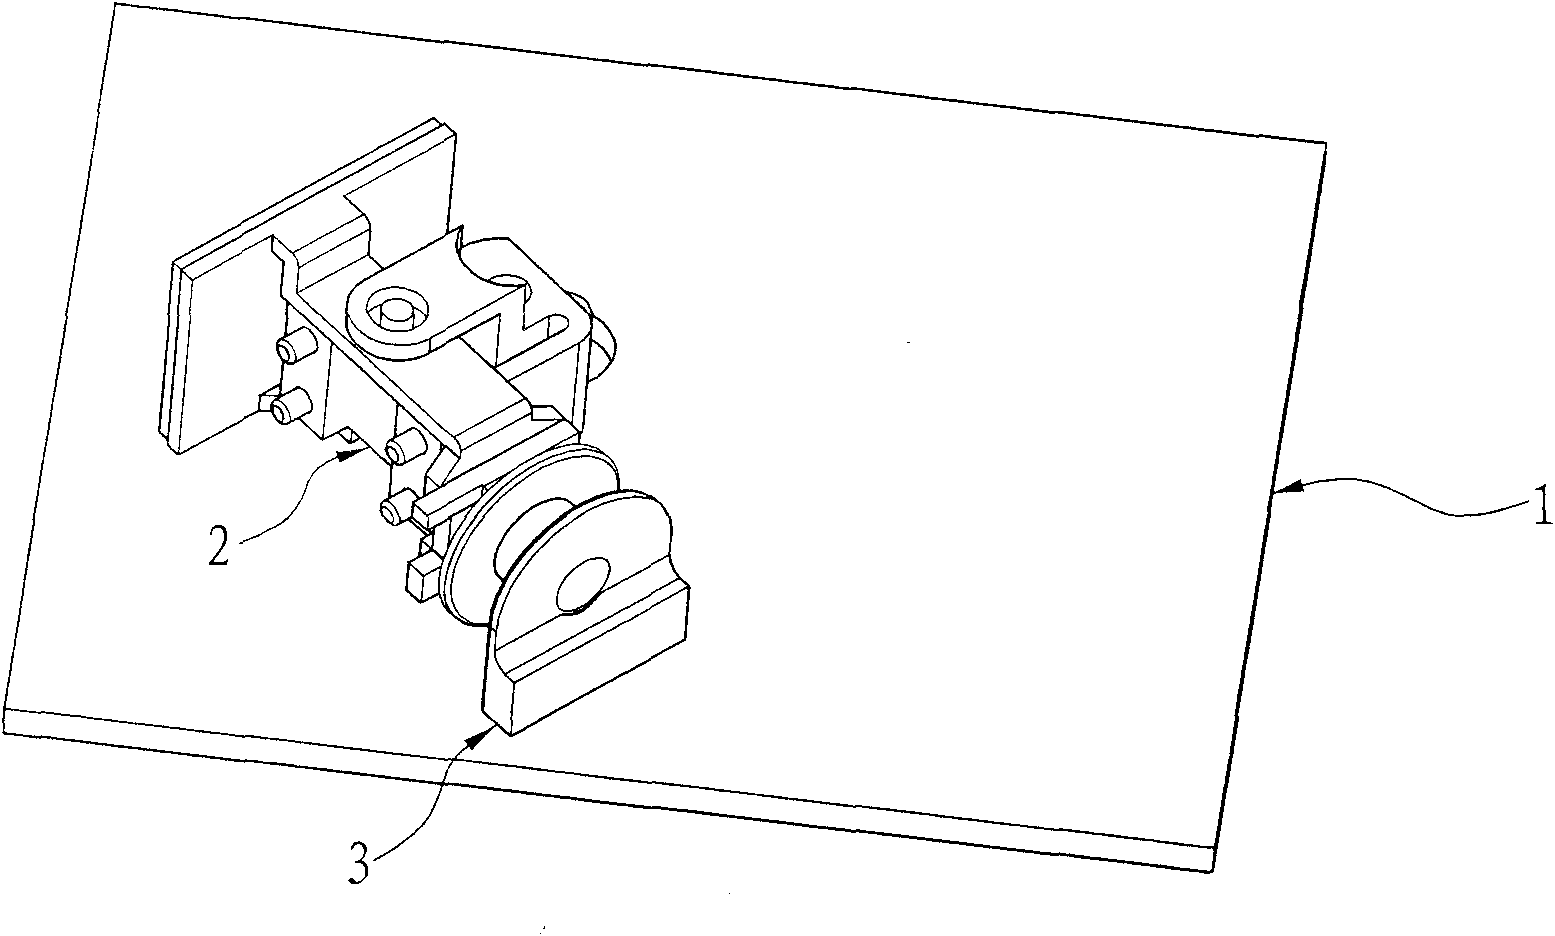 Device for rapidly starting bar code scanning